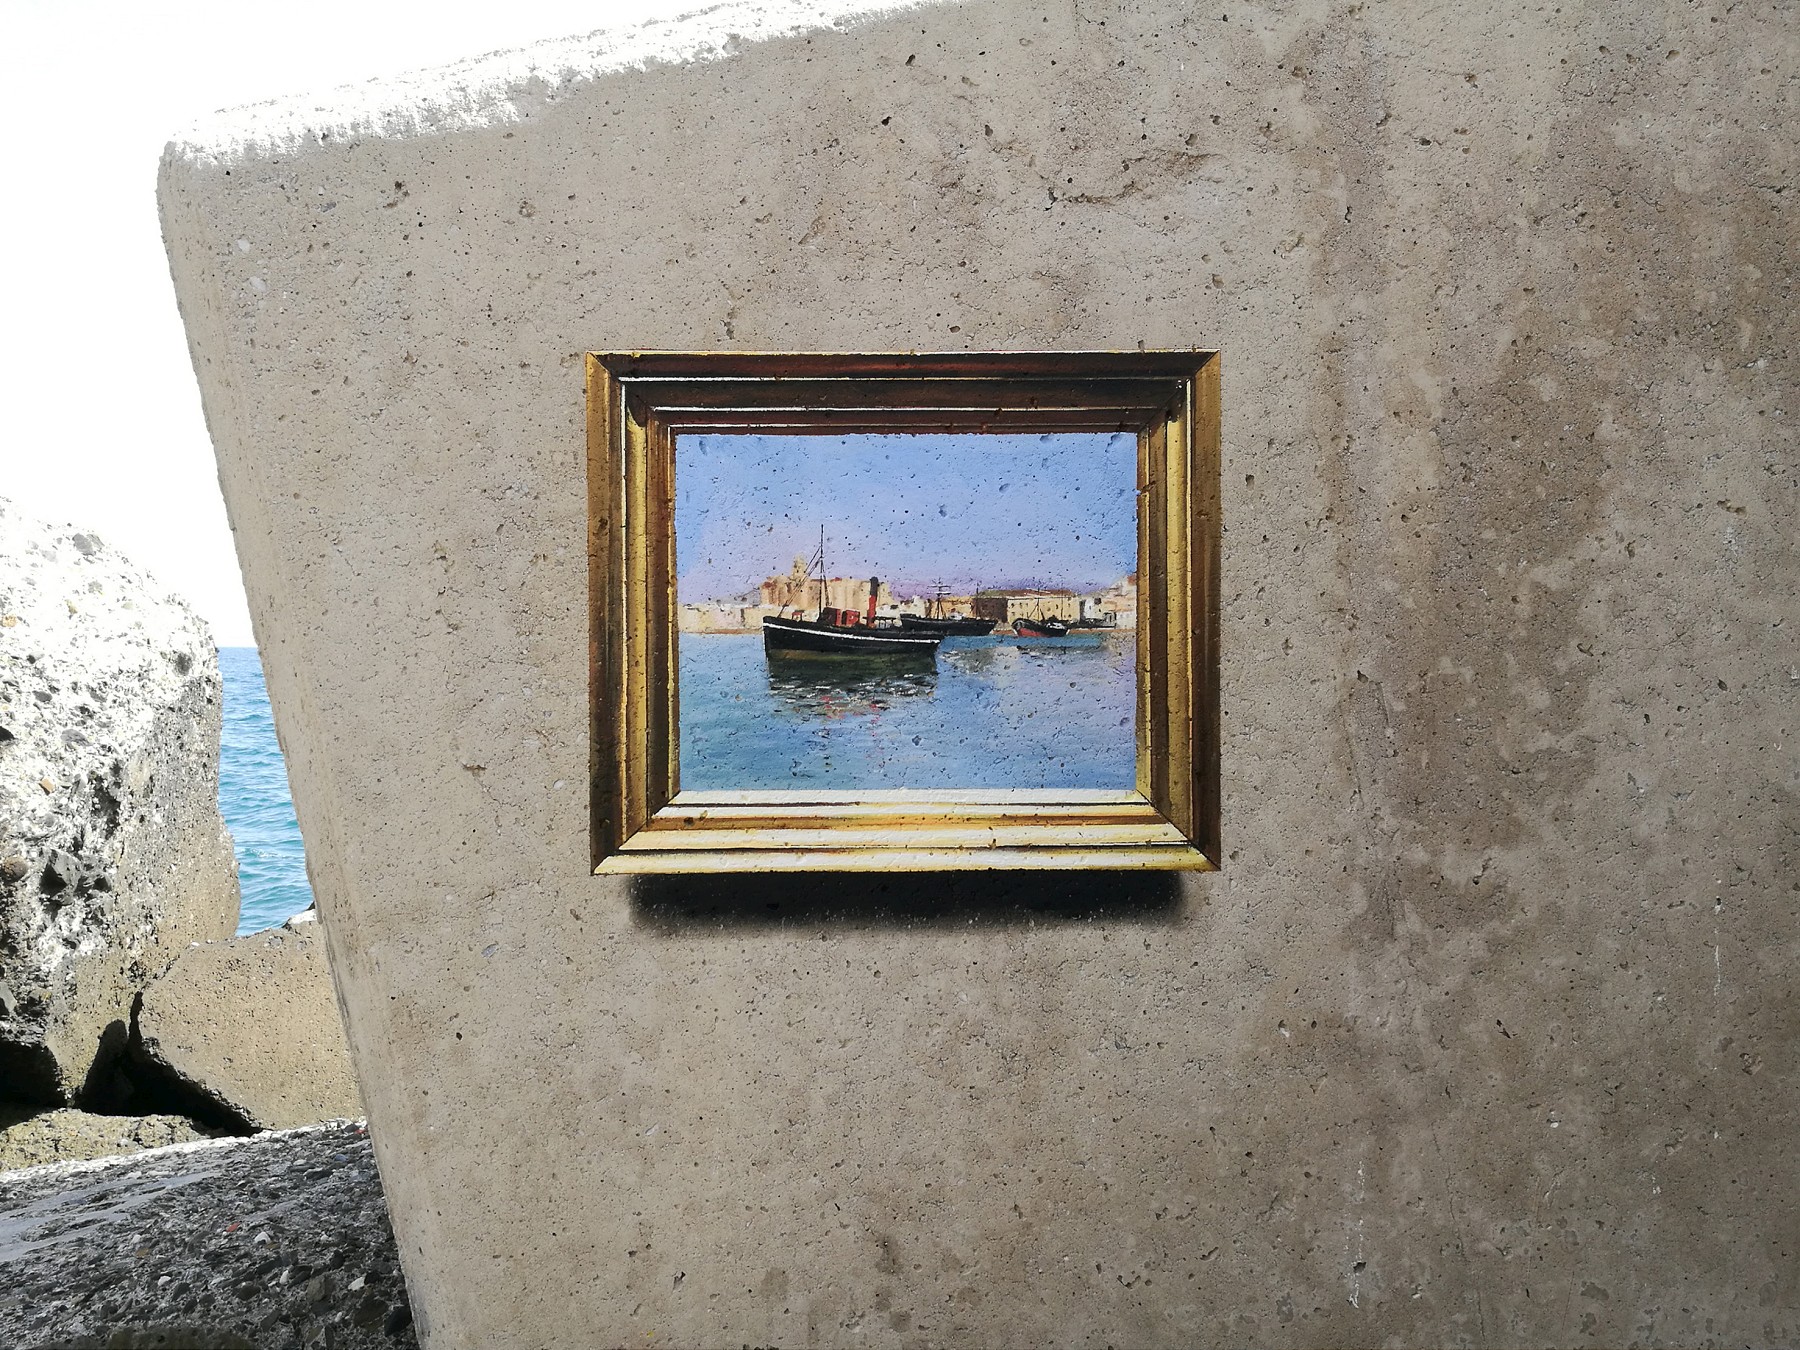 Ship Artwork Wall Picture Frames Mural Julio Anaya Cabanding Painting Rock Sea Concrete 1800x1350